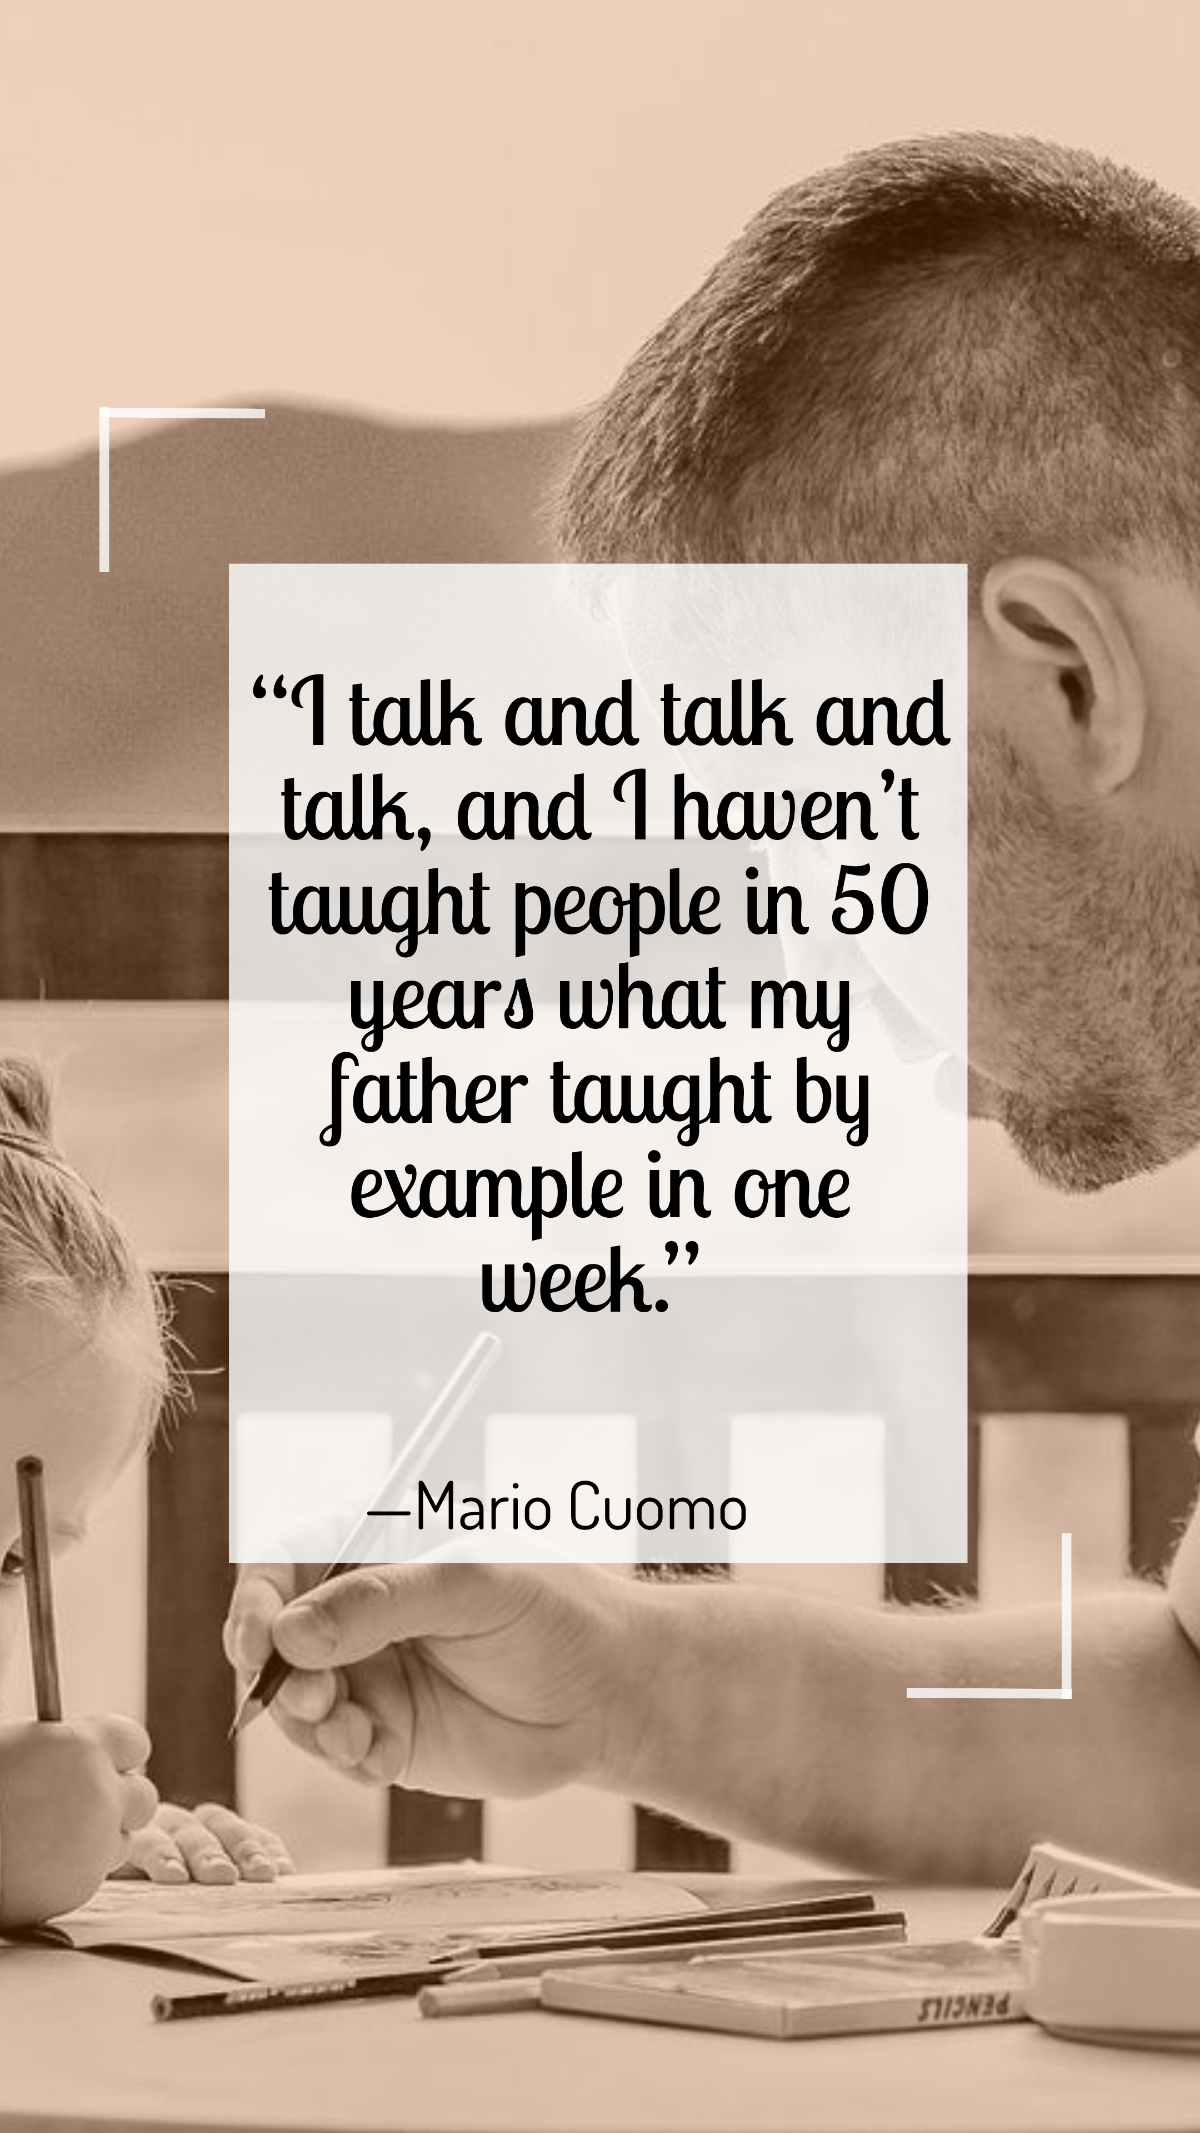 Mario Cuomo - “I talk and talk and talk, and I haven’t taught people in 50 years what my father taught by example in one week.”  Template